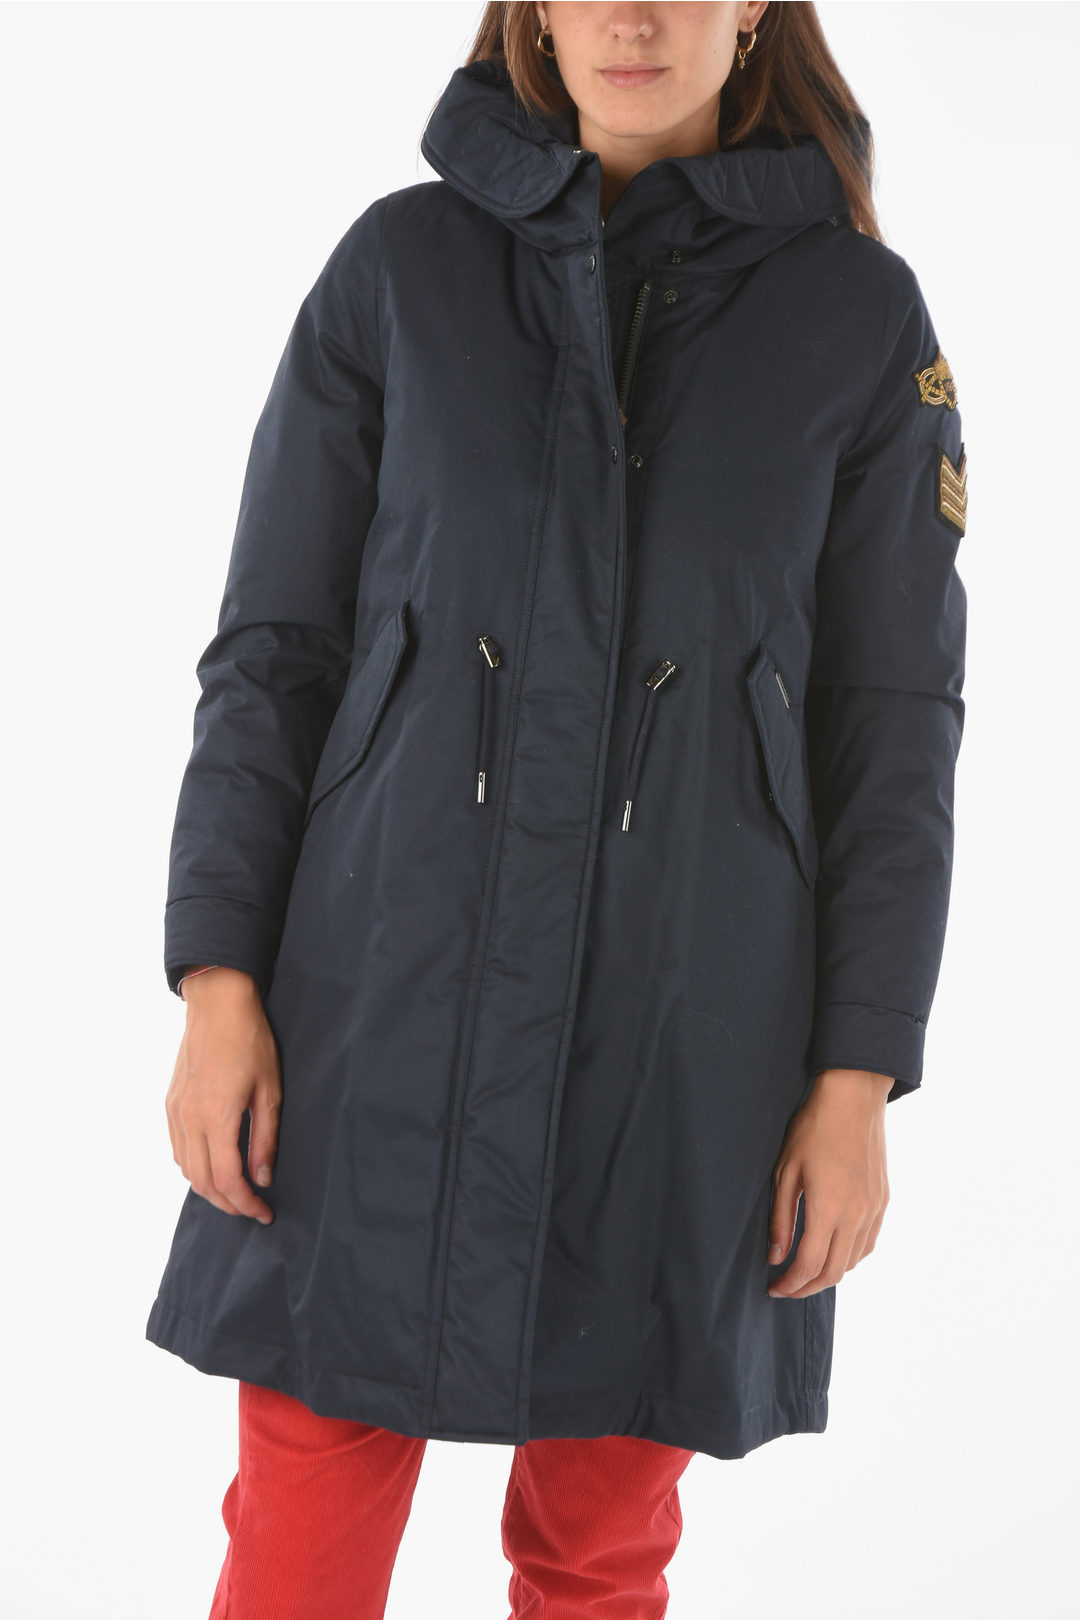 Woolrich Snap Buttons 2 Pockets REDFIELD Down Jacket women - Glamood Outlet